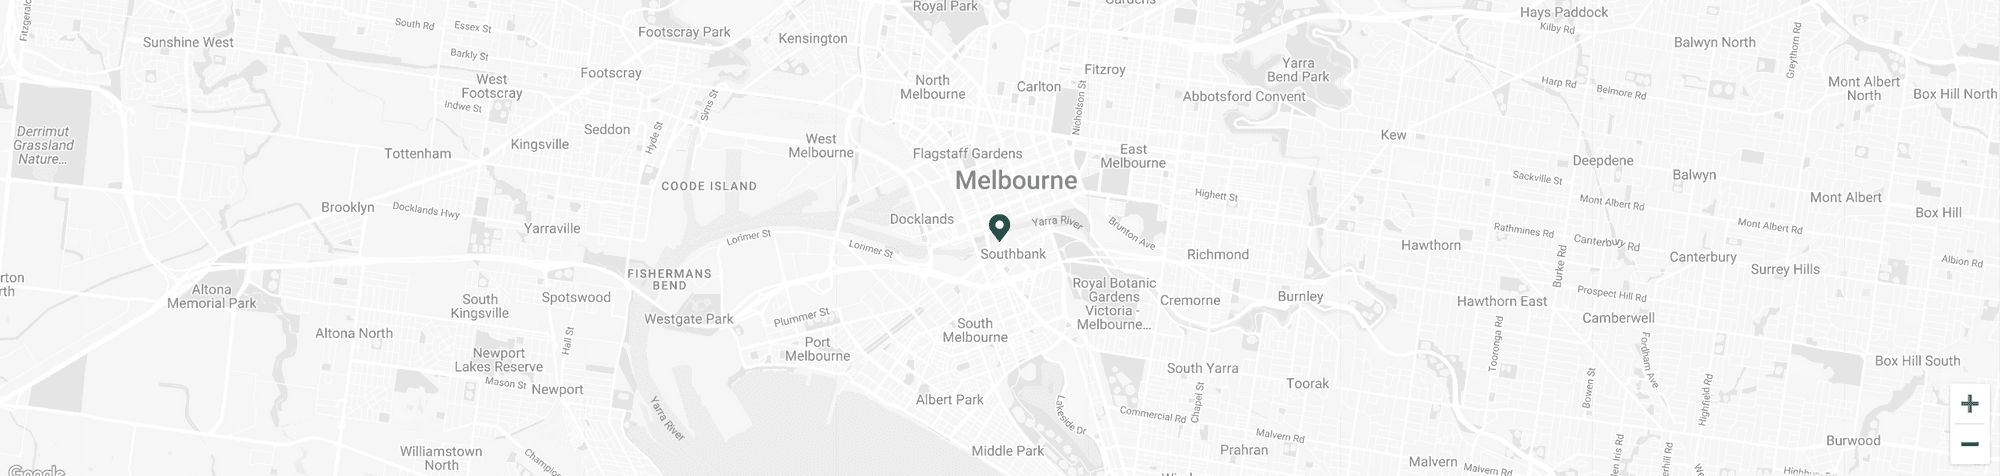 Map image of Crown Towers Melbourne